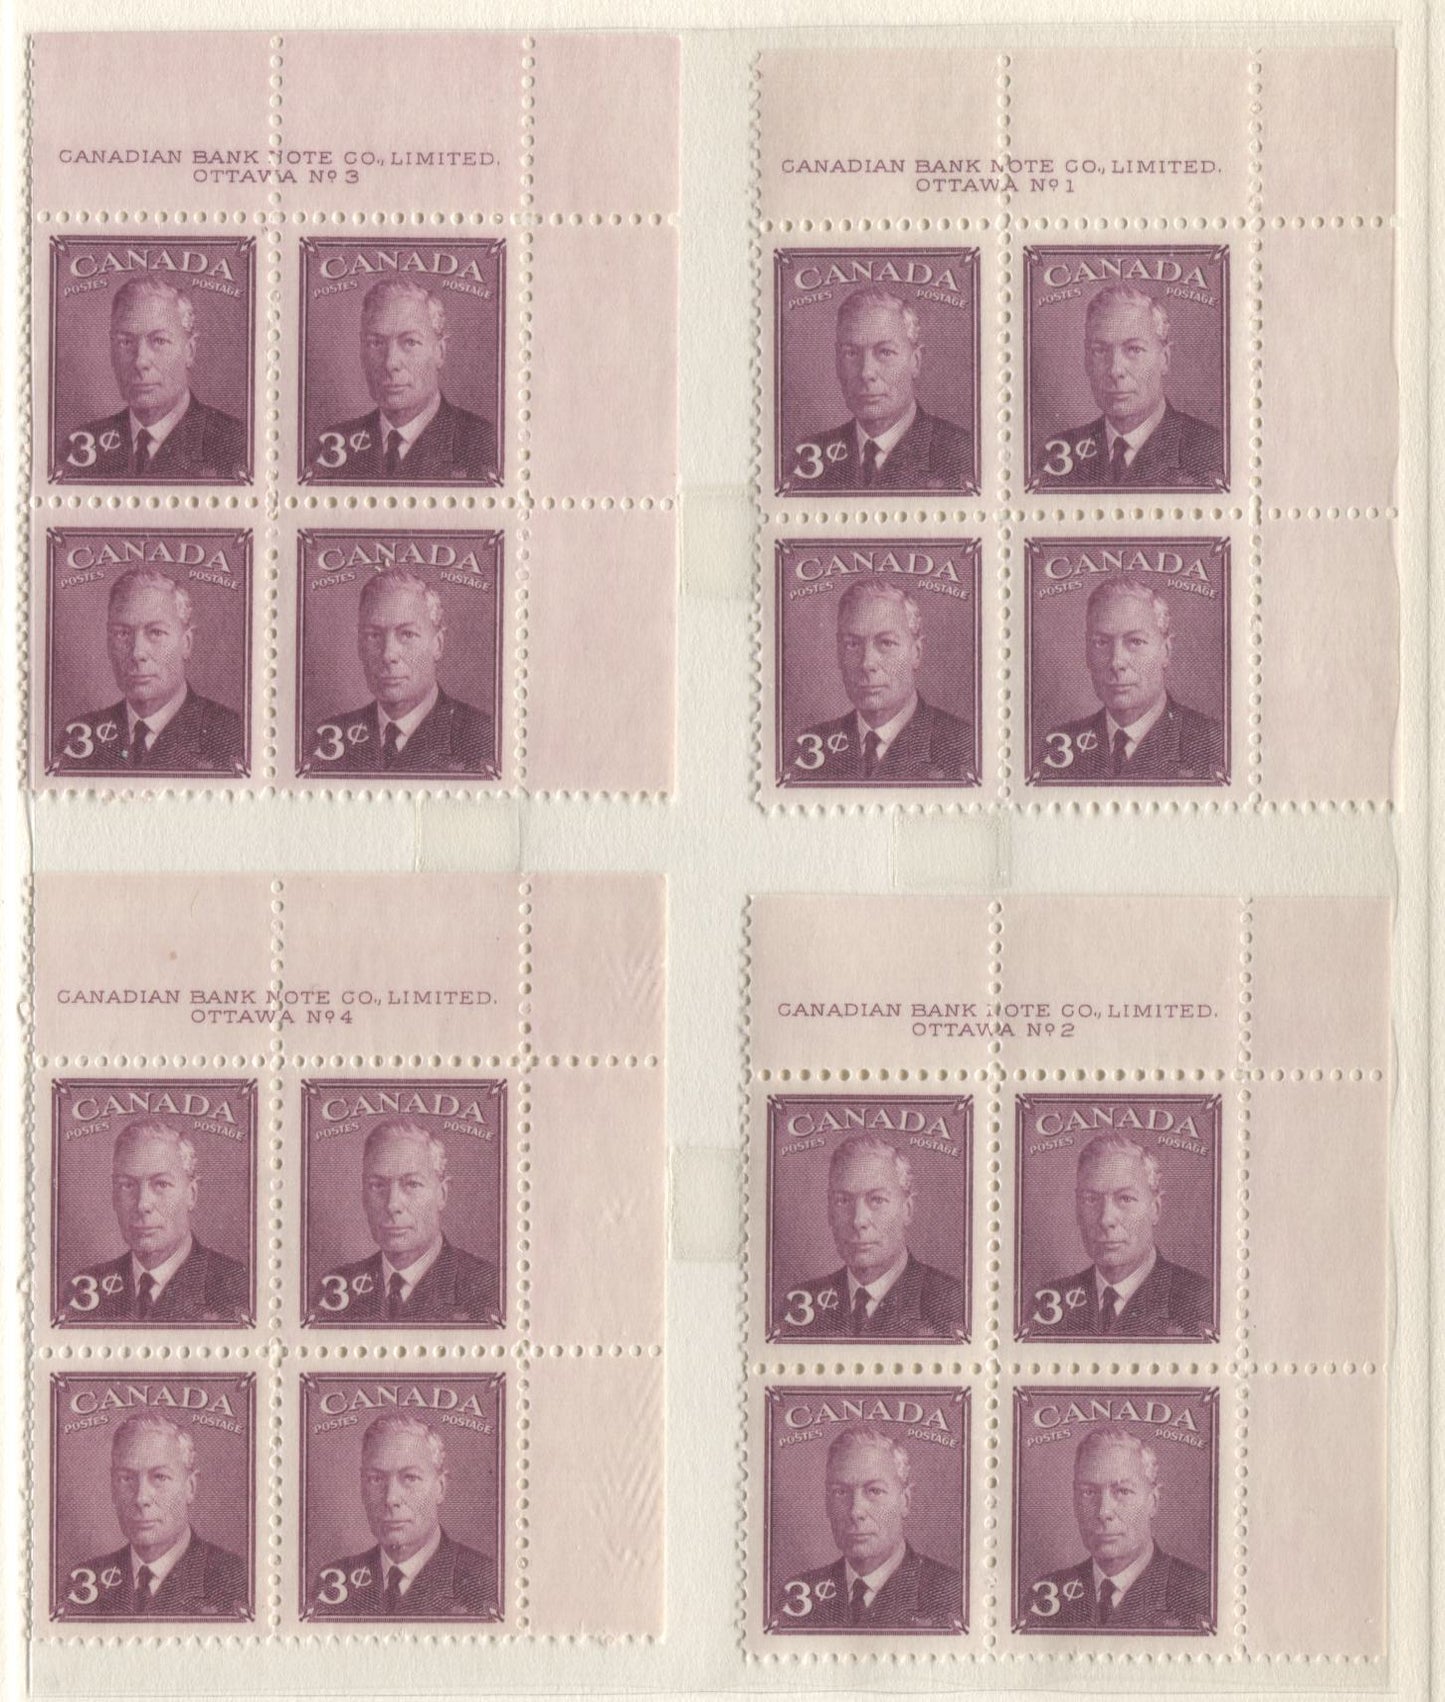 Lot 10 Canada #286 3c Rose Violet King George VI, 1949 Postes-Postage Issue, 8 Fine and VFNH UR Plates 1-8 Blocks Of 4